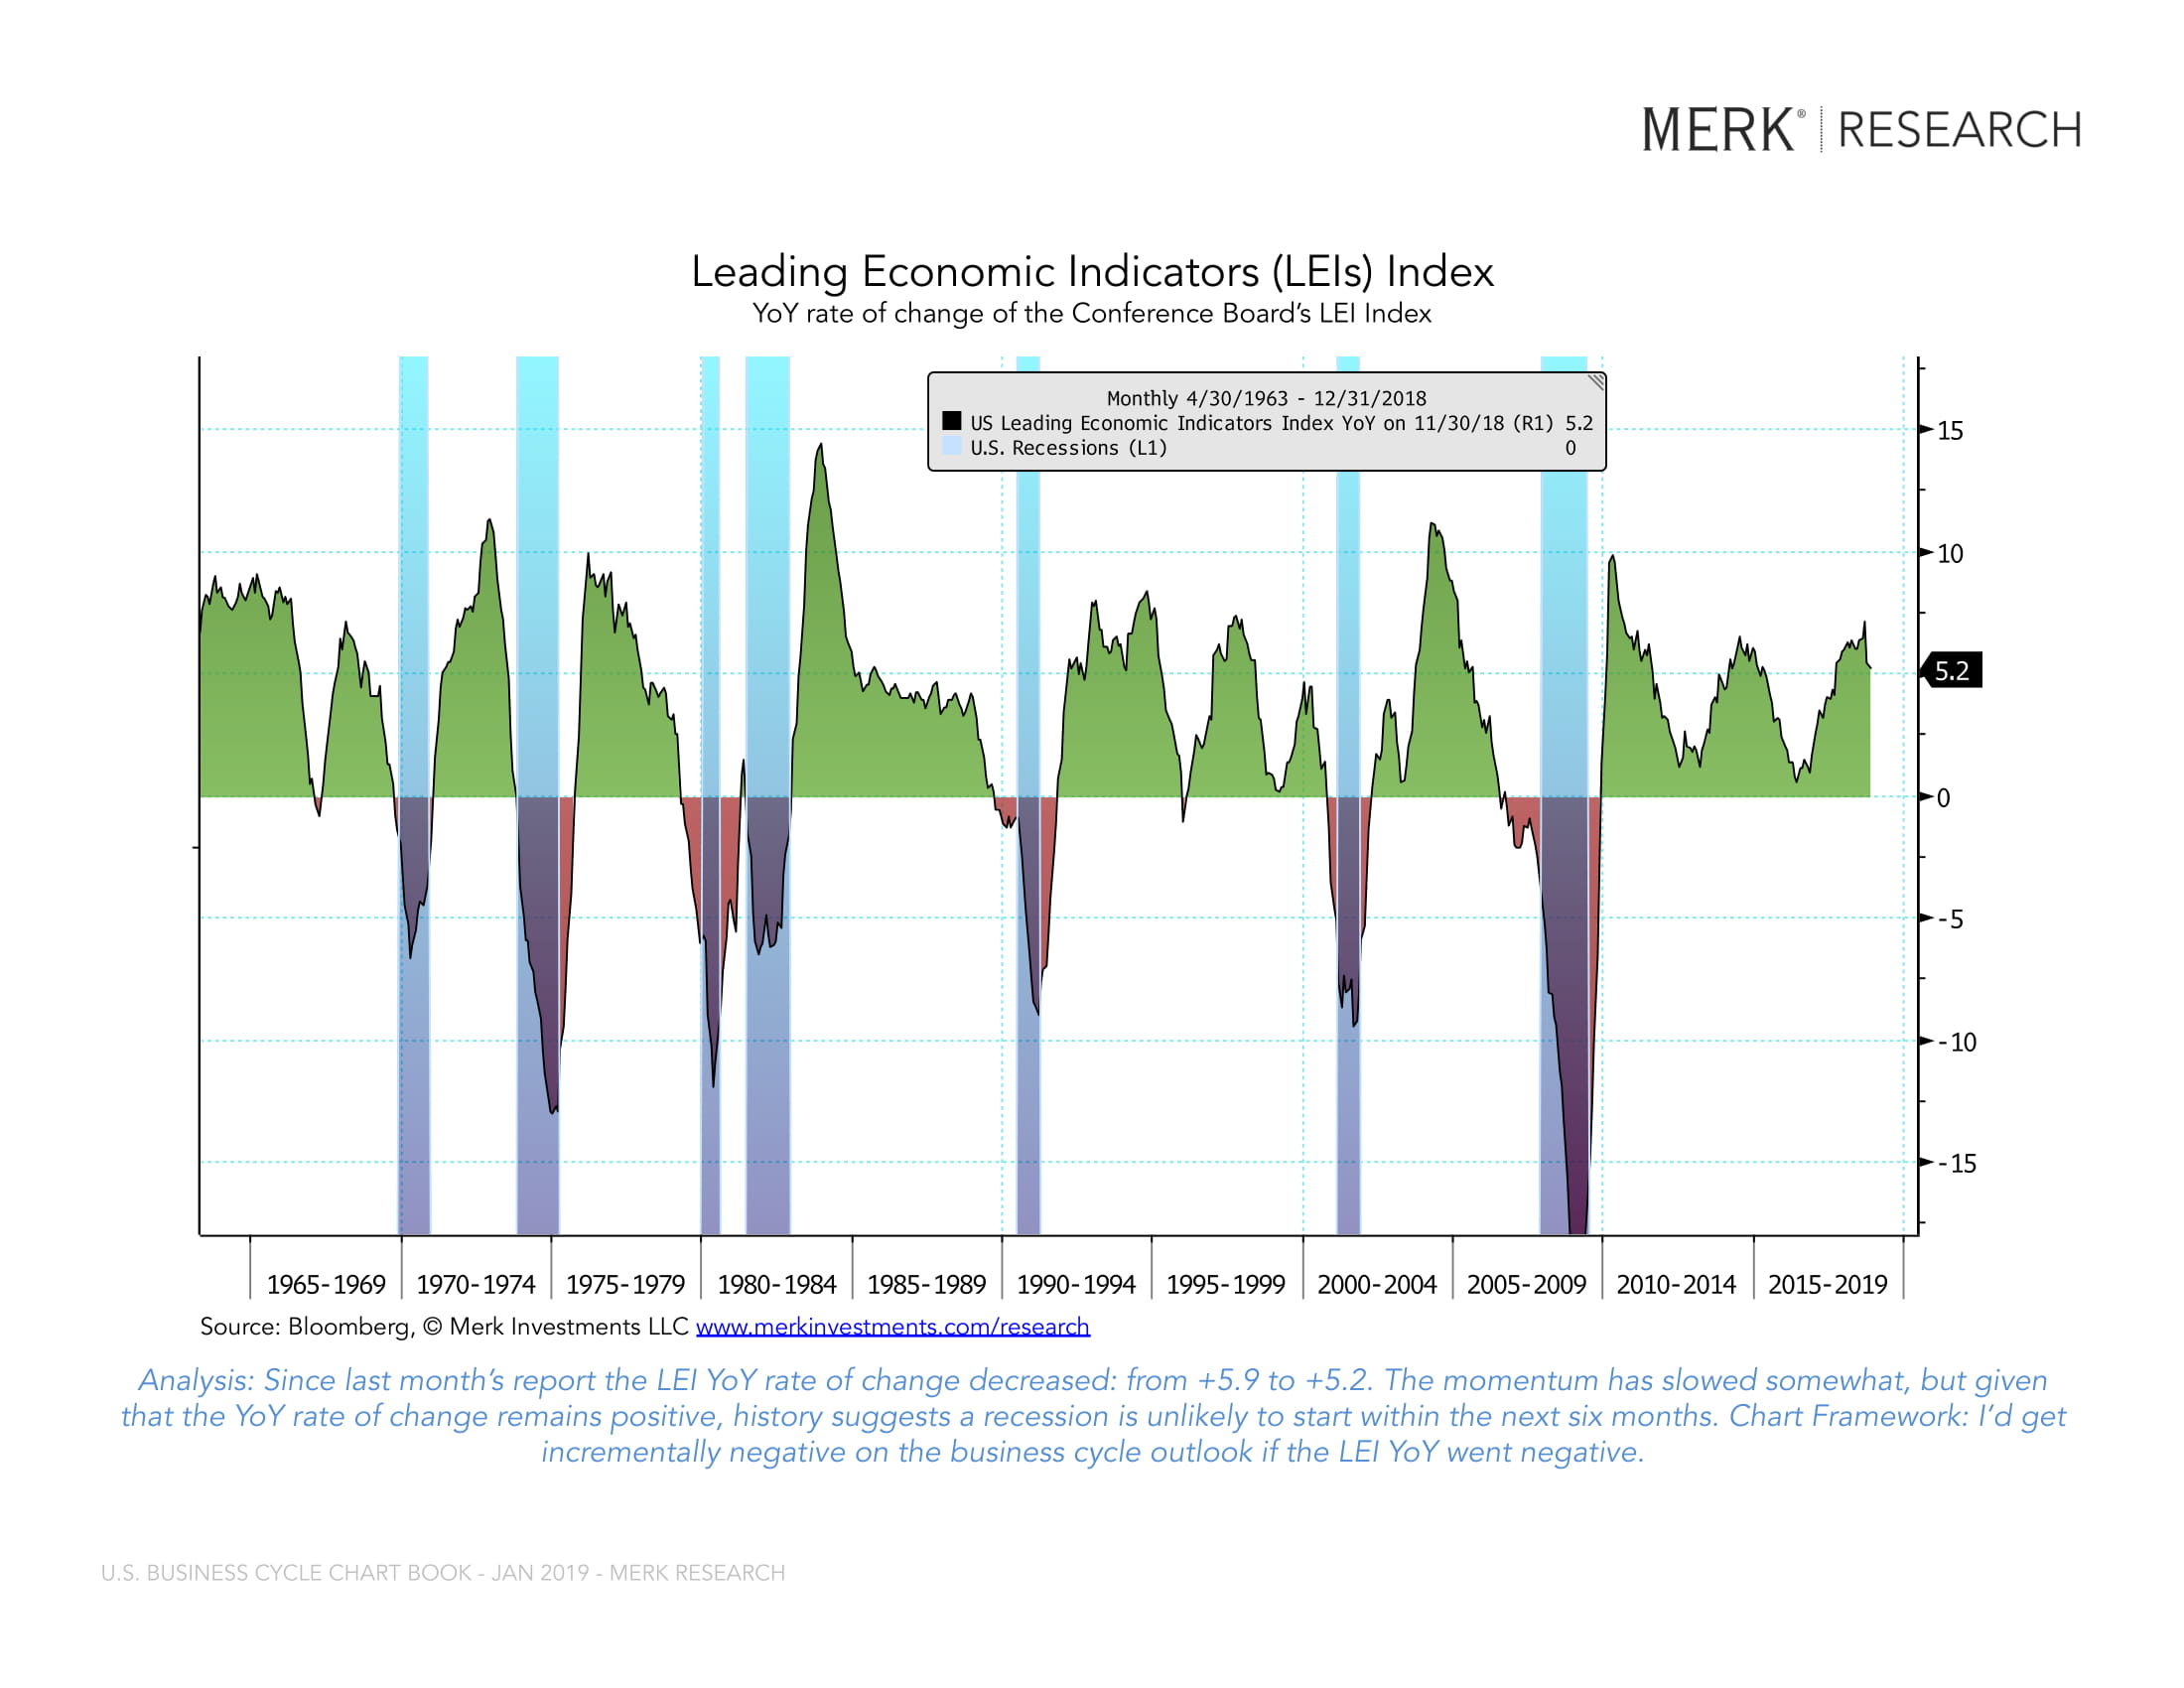 Merk Research: U.S. Business Cycle -- recession??